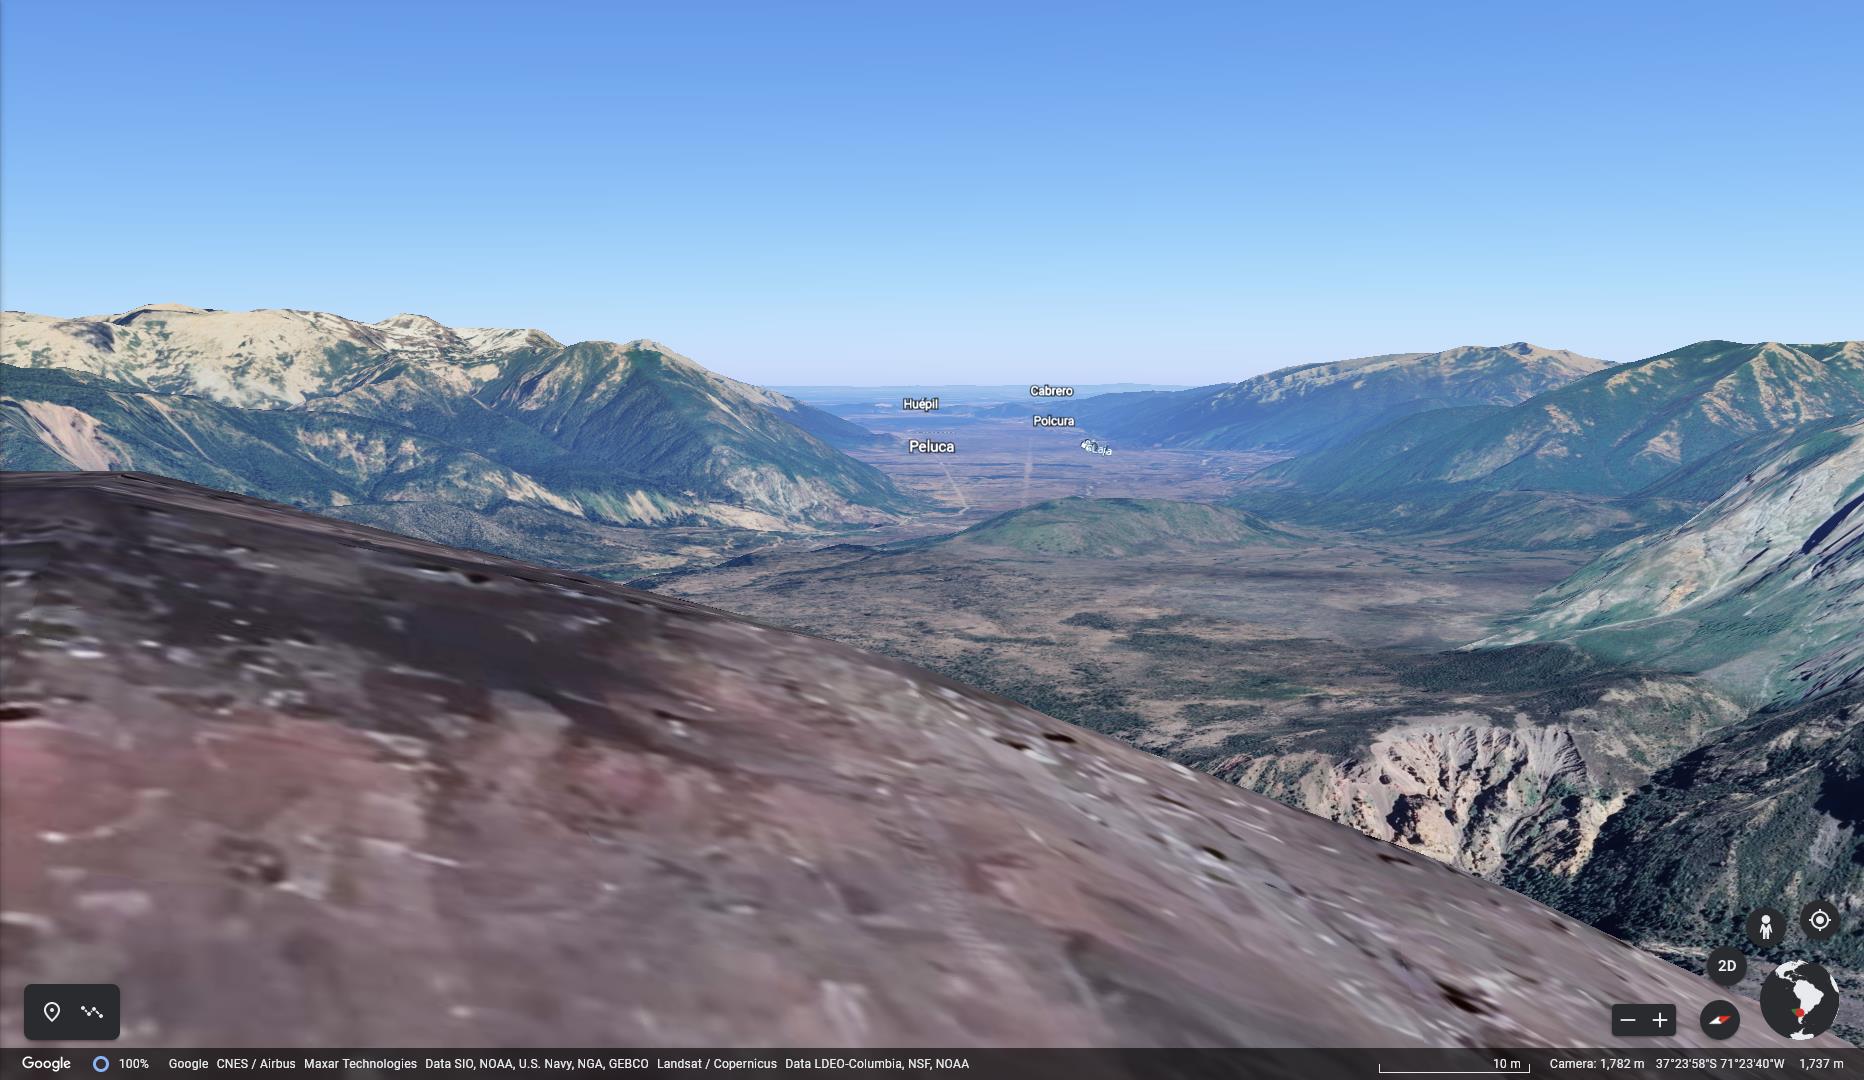 An image taken from Google Earth of the approximate location the group were standing at